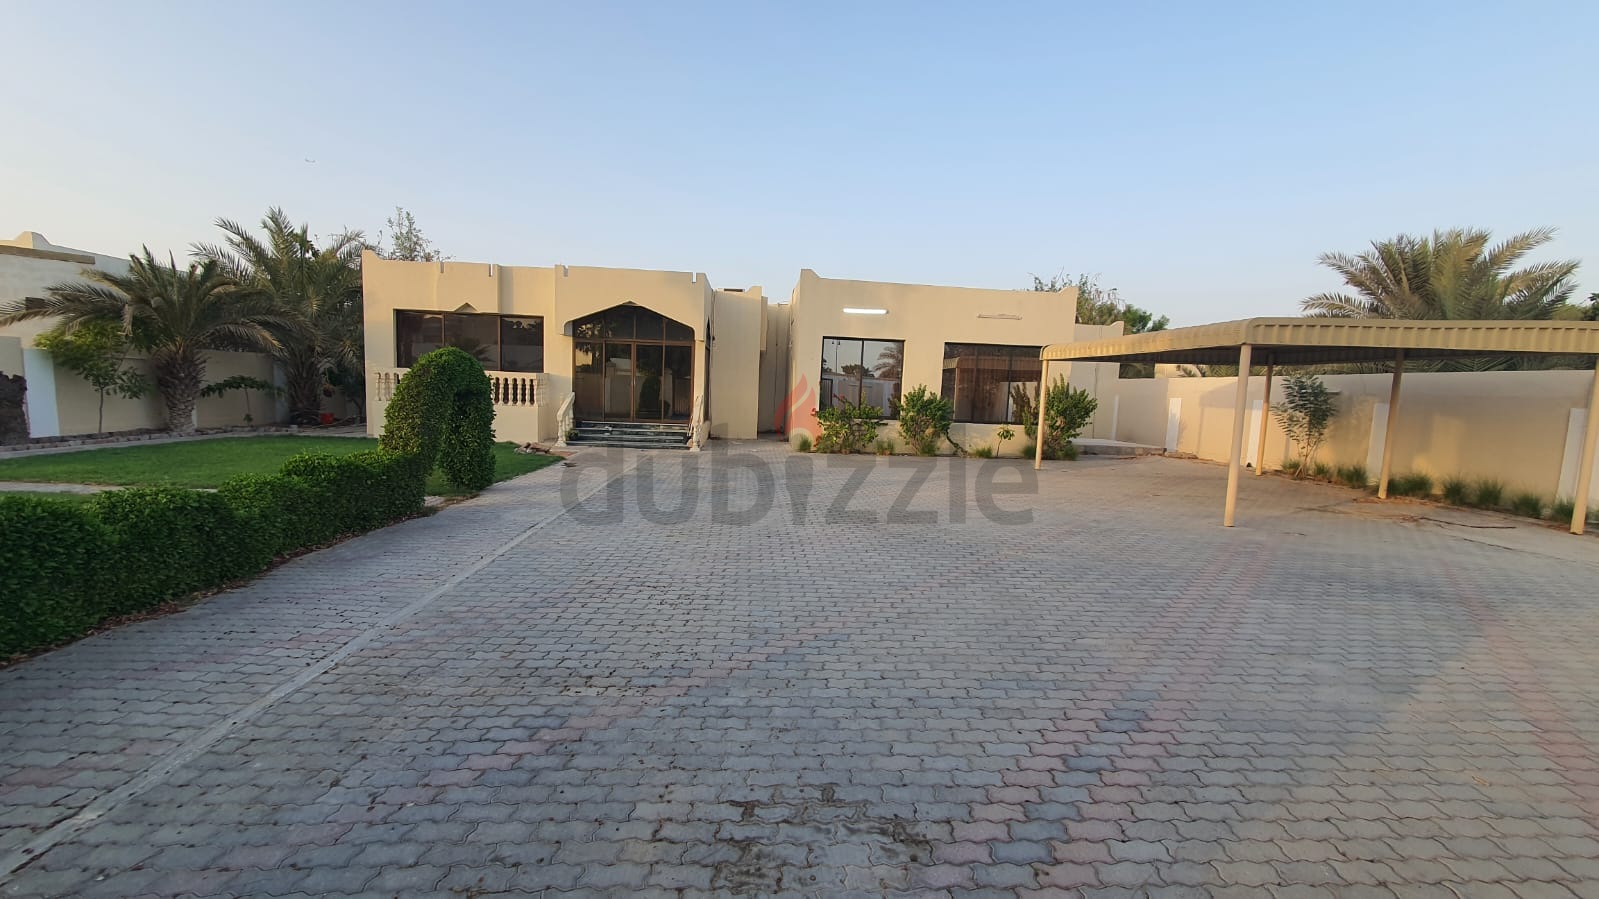 For Sale A Popular House In Sharjah, Al Yash Area